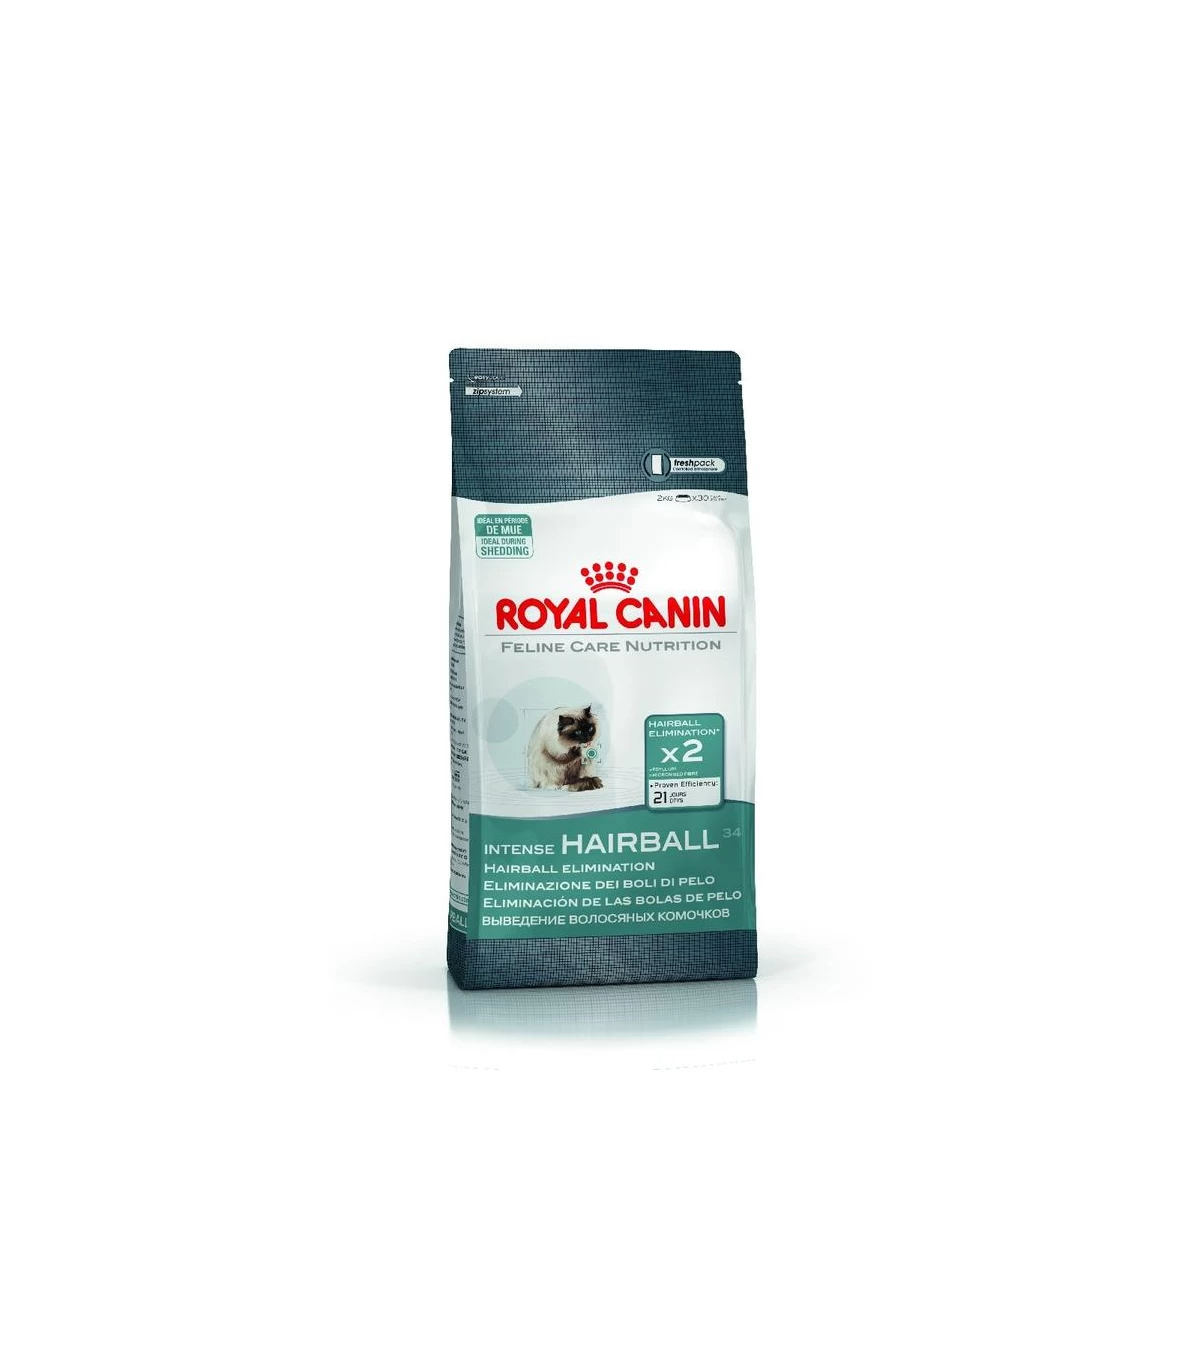 Image of Feline Care Nutrition Intensive Hairball Care Royal Canin 400g